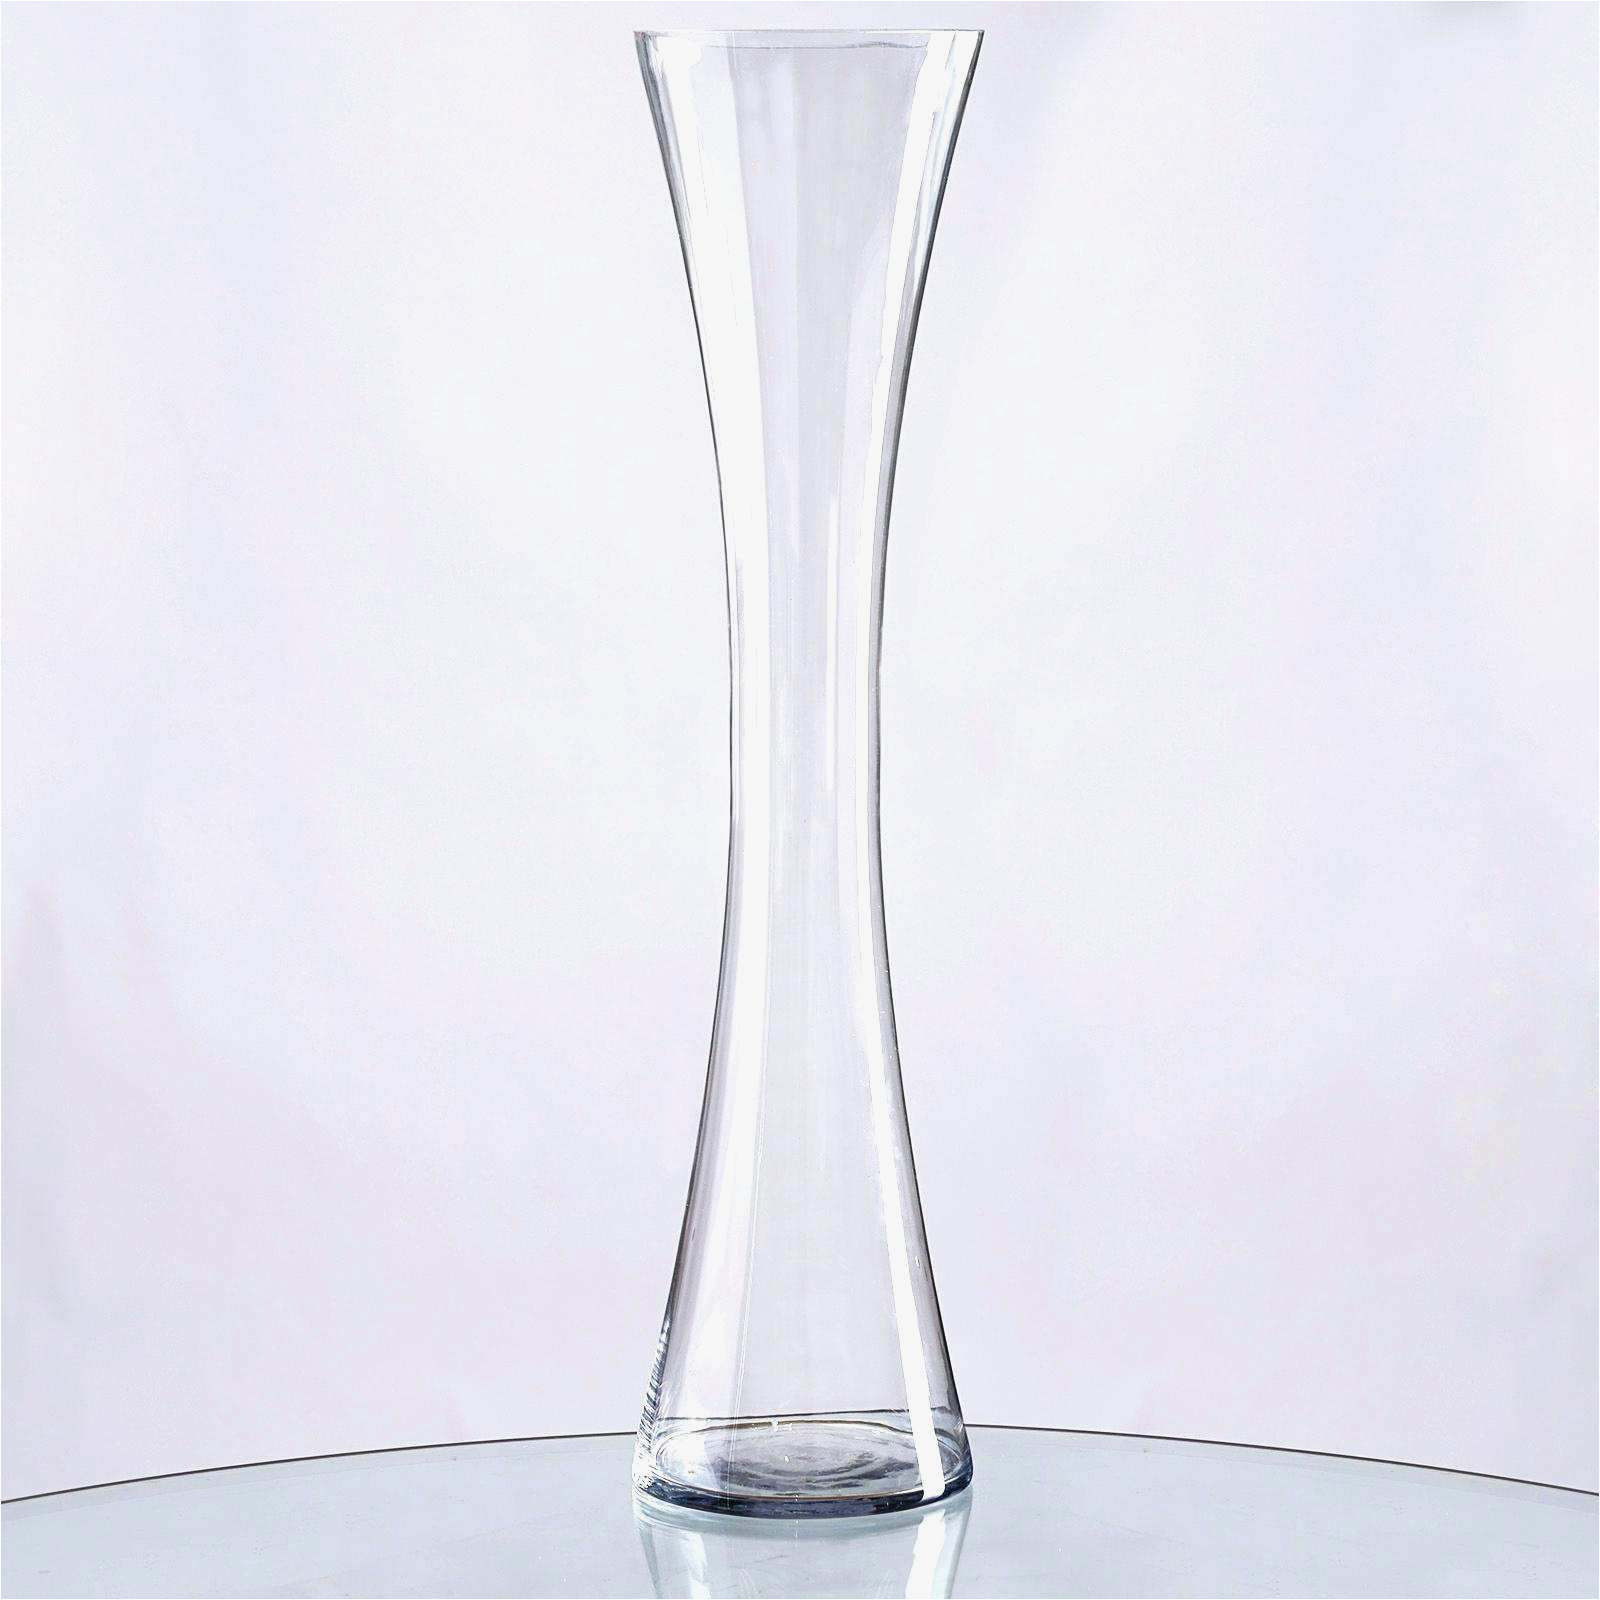 24 Perfect Clear Acrylic Square Vases 2024 free download clear acrylic square vases of cheap wedding decorations in bulk opinion bulk wedding decorations for cheap wedding decorations in bulk gallery glass vase centerpieces for wedding luxury desi